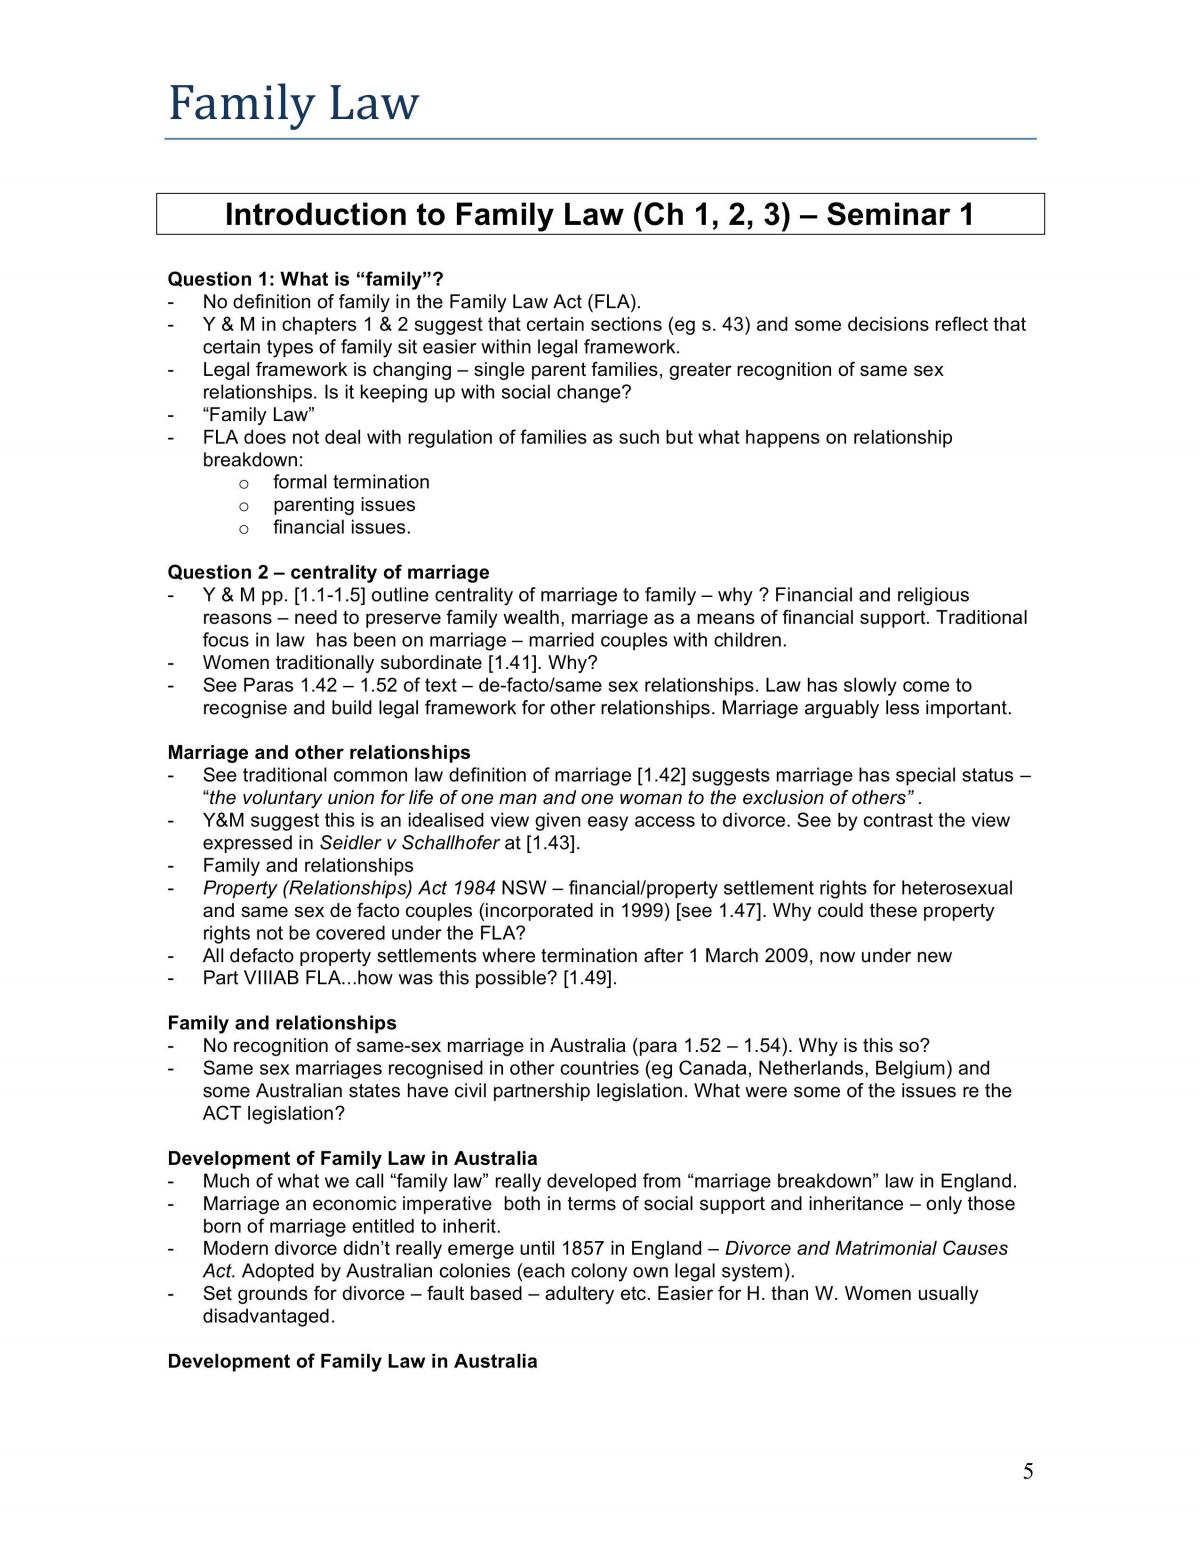 Family Law Notes - Page 5